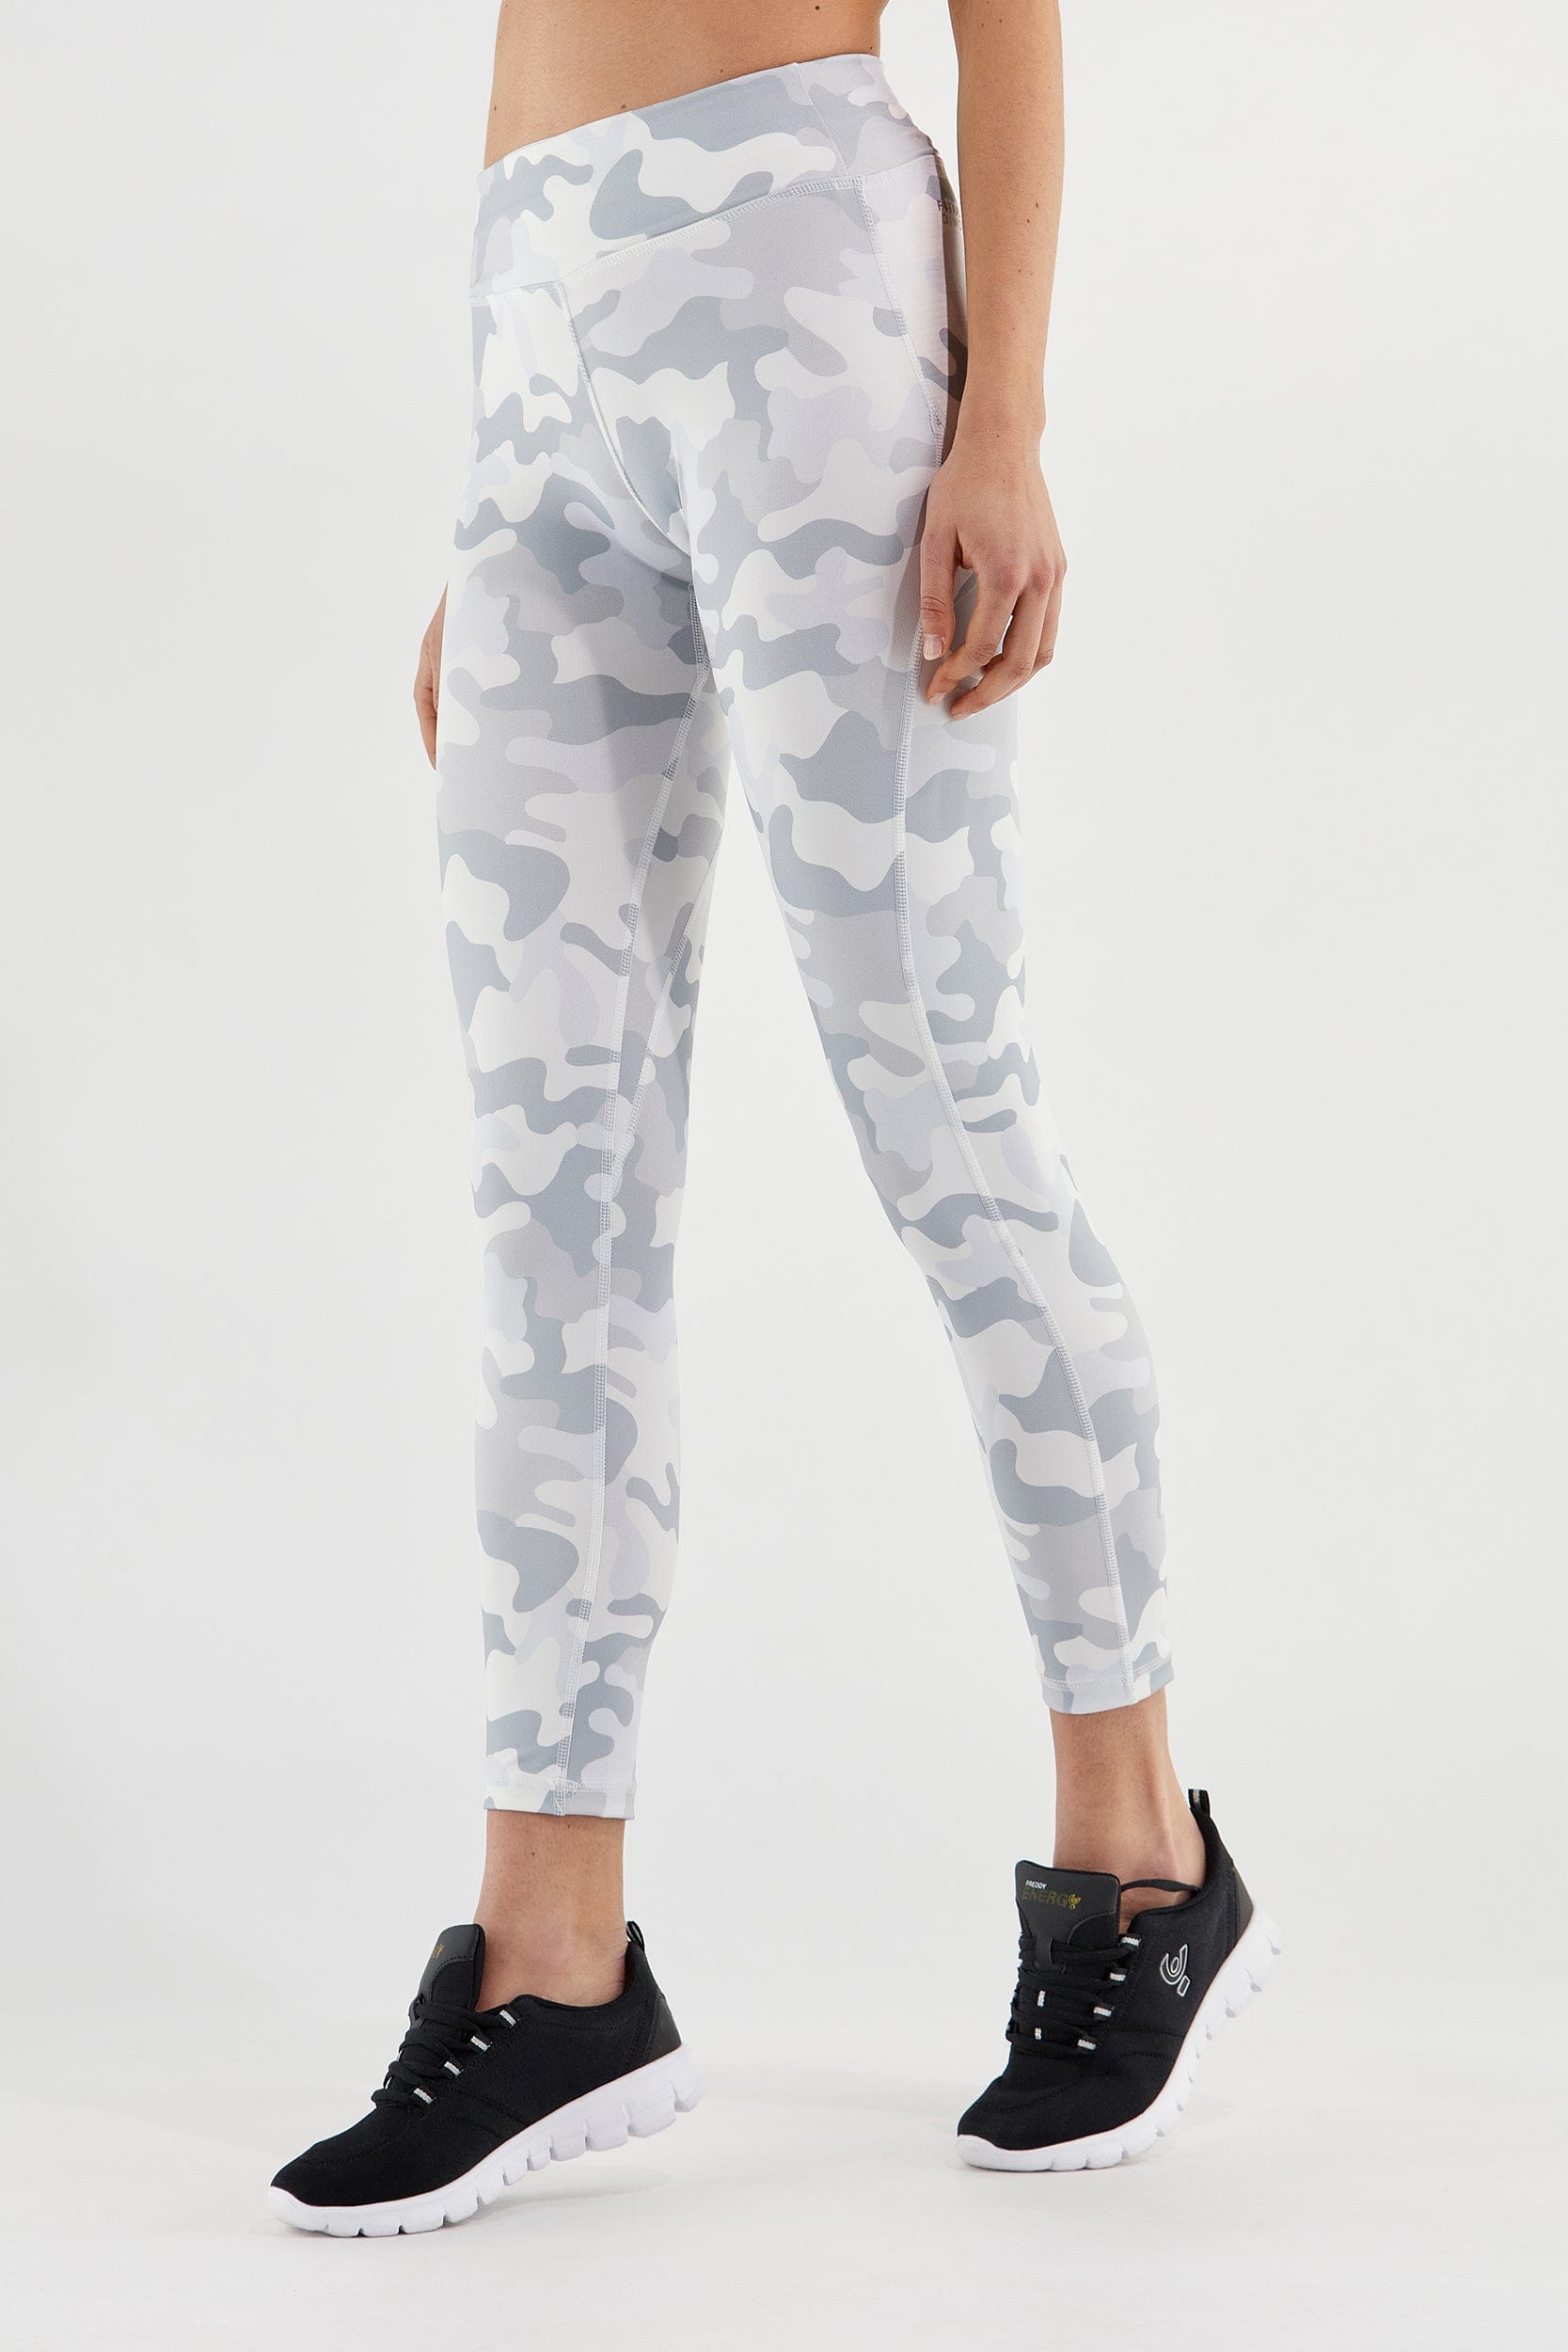 WR.UP® Sport Leggings - Mid Rise - 7/8 Length - White + Grey Camouflage 2